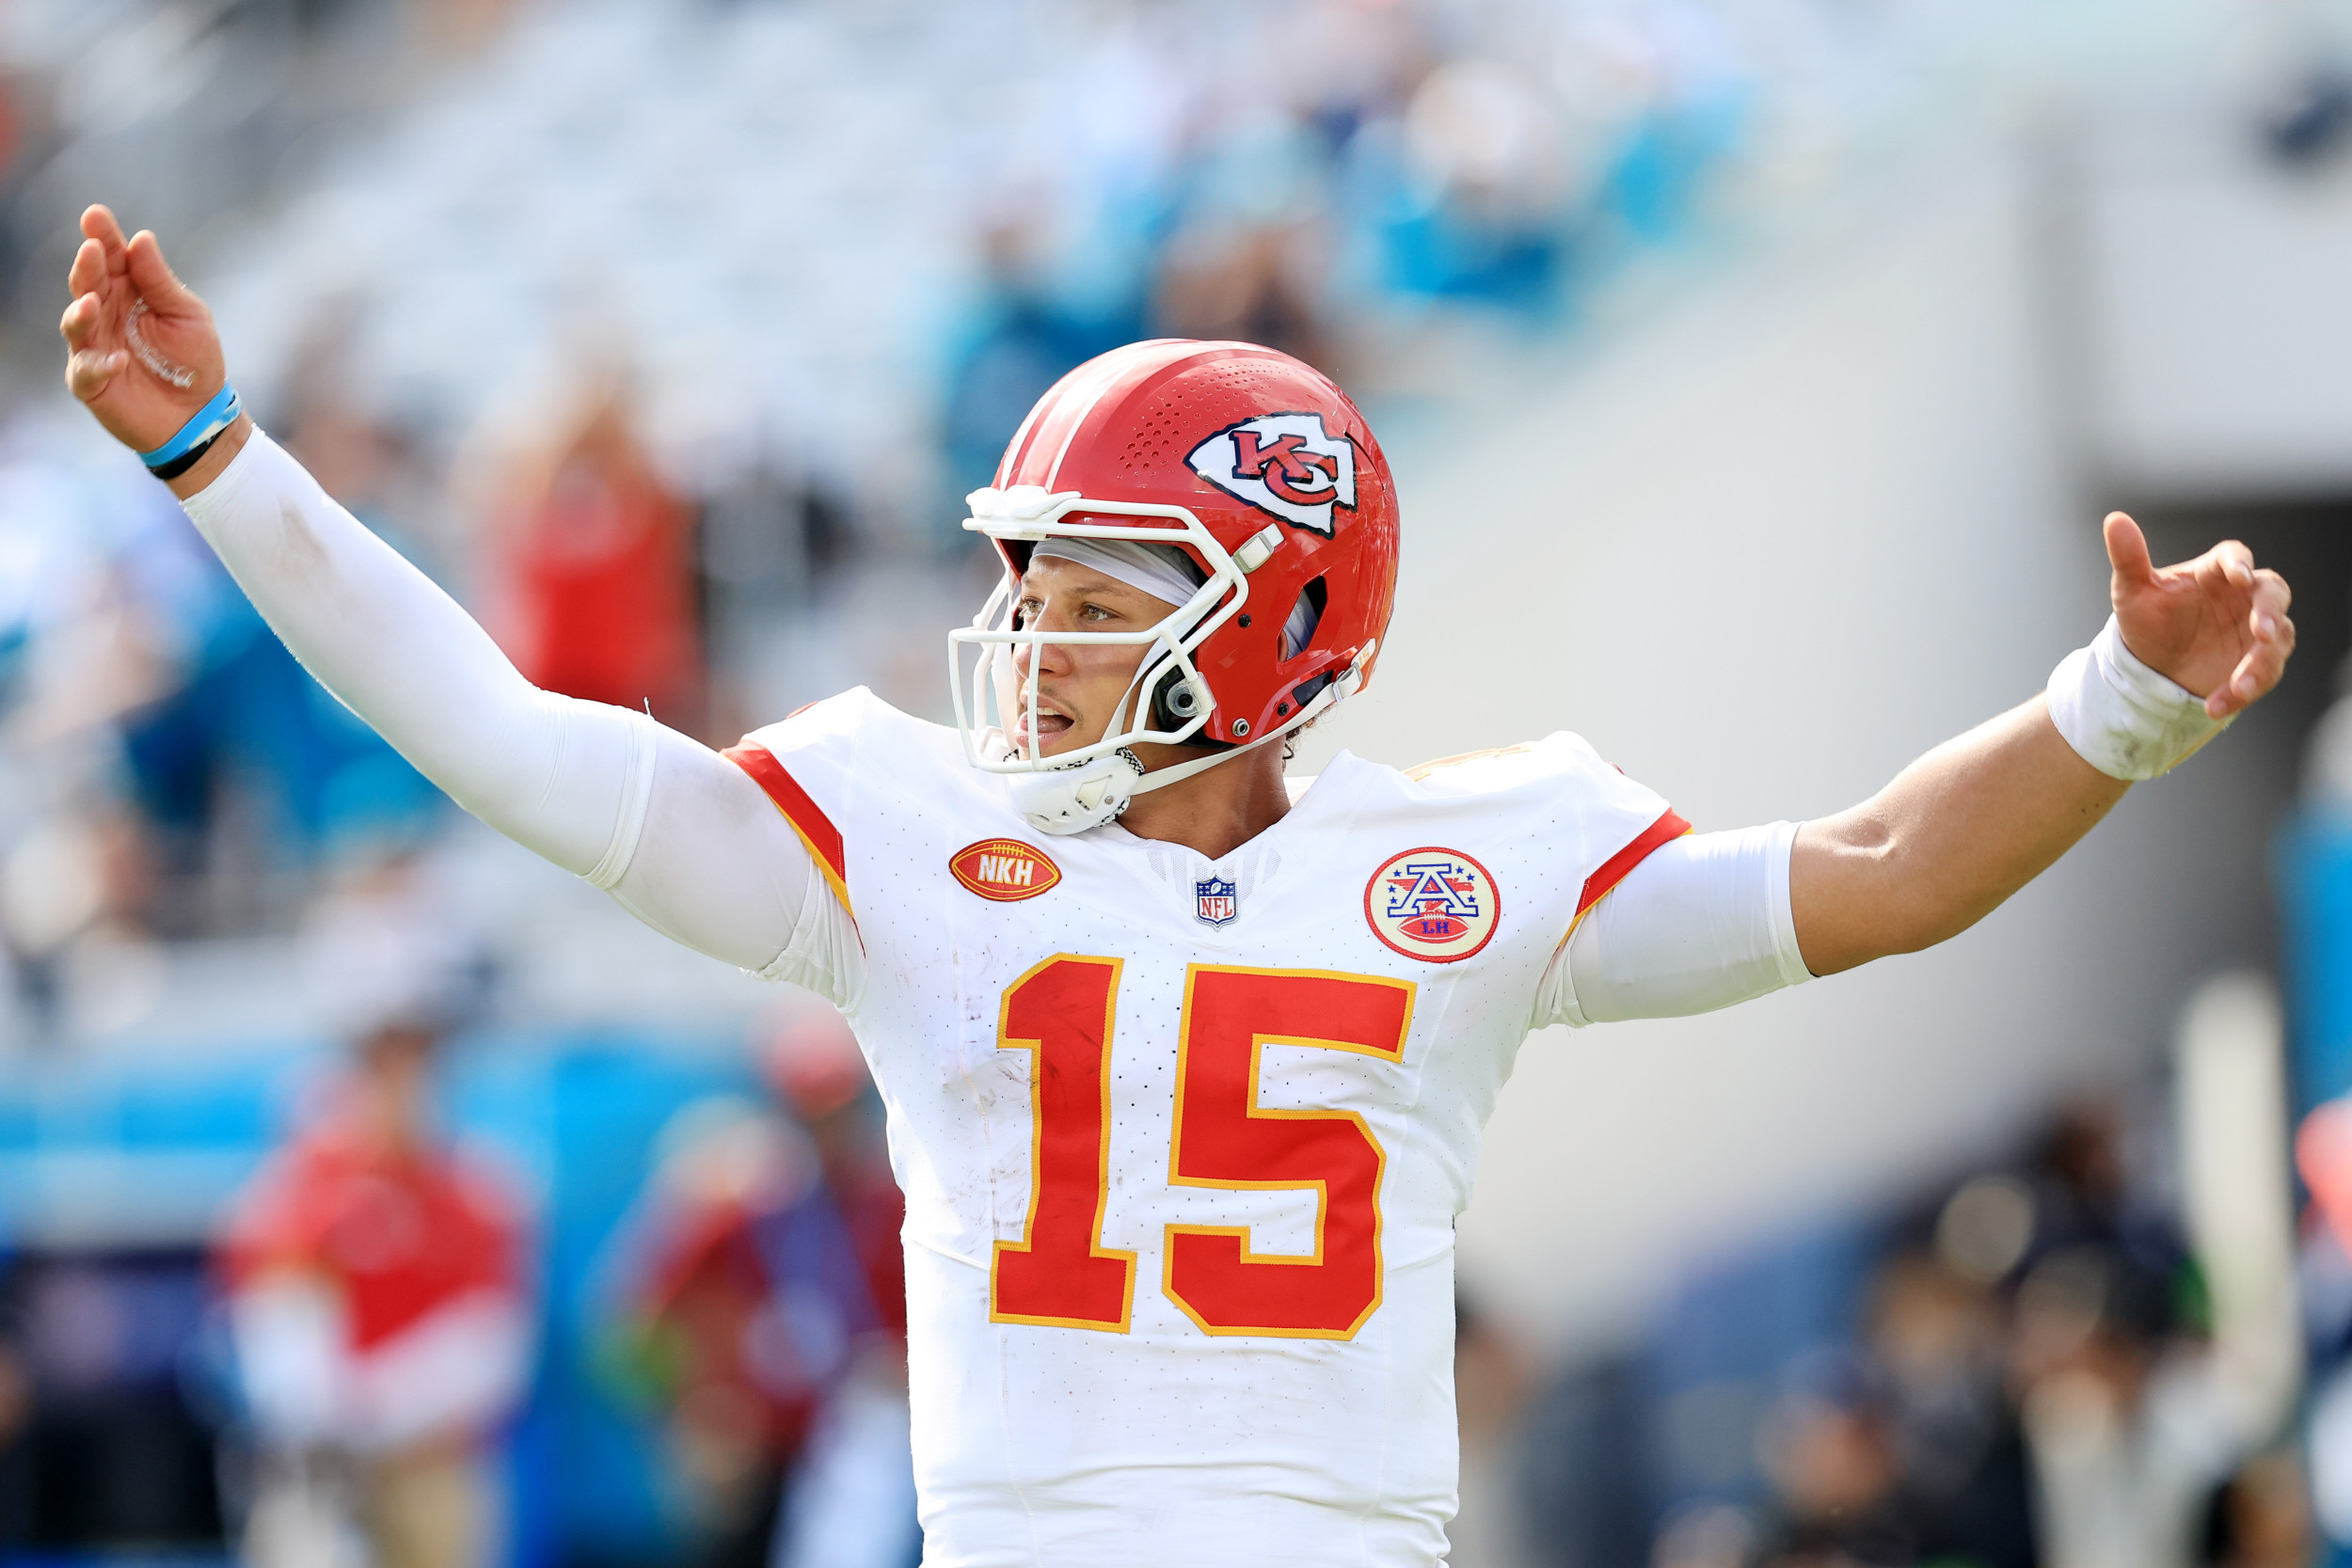 Patrick Mahomes Just Made NFL History With His Contract